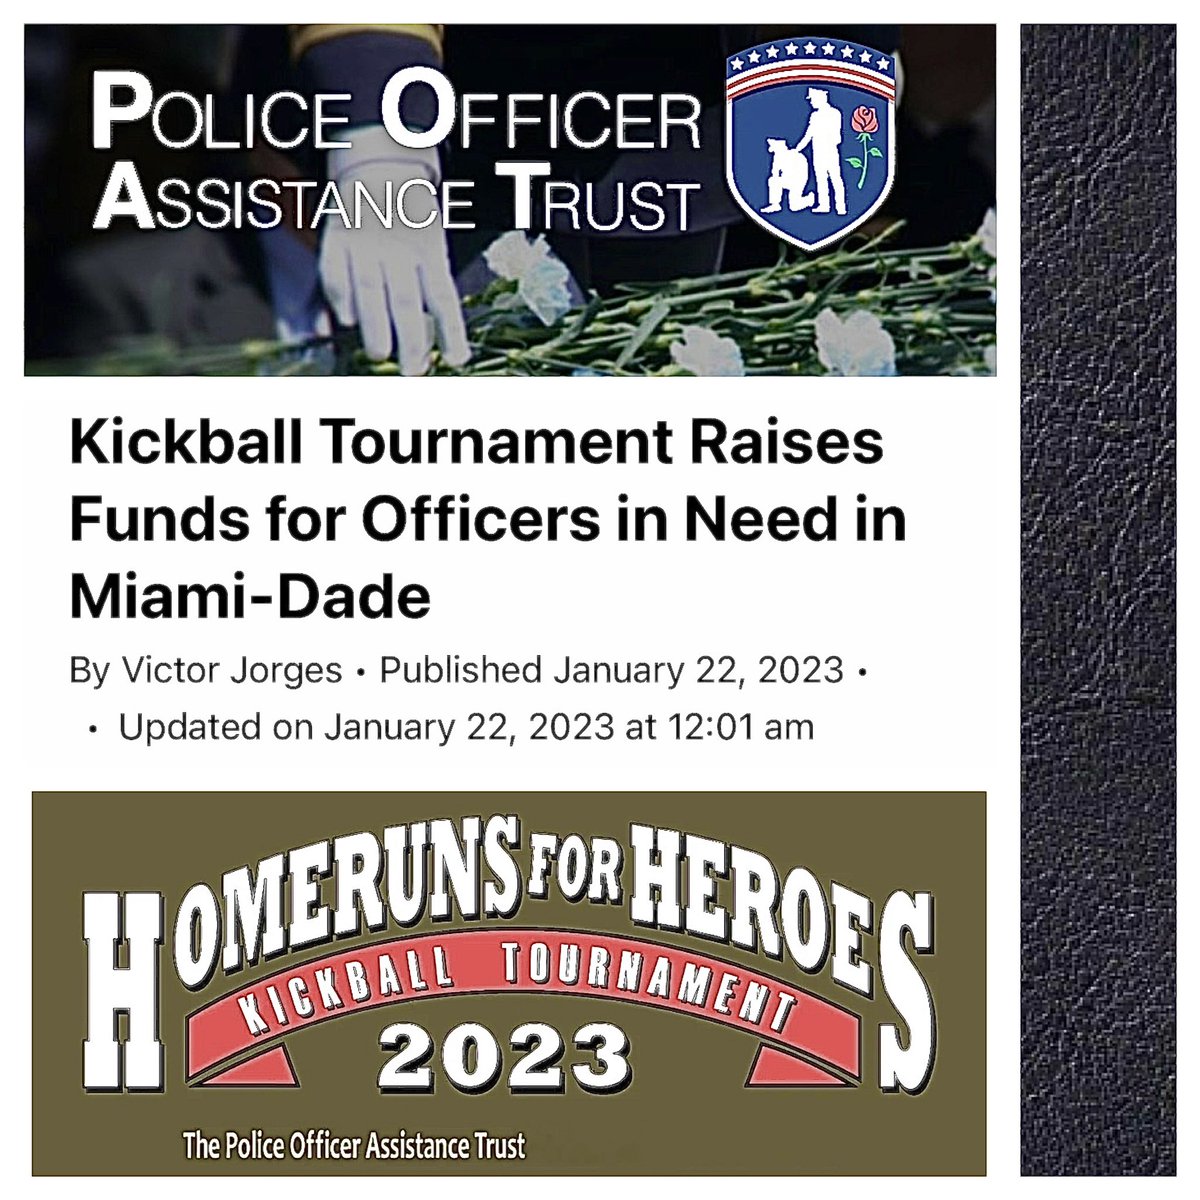 nbcmiami.com/news/local/kic… #policeofficerassistancetrust #poat #policeofficers #fireandrescue #lawenforcementofficer #lawenforcementfamily #fallenhero #fallenbutnotforgotten #officerdown #GoodCause #eventsnearme #donationswelcome #donationsappreciated #donationsaccepted #OURHEROES